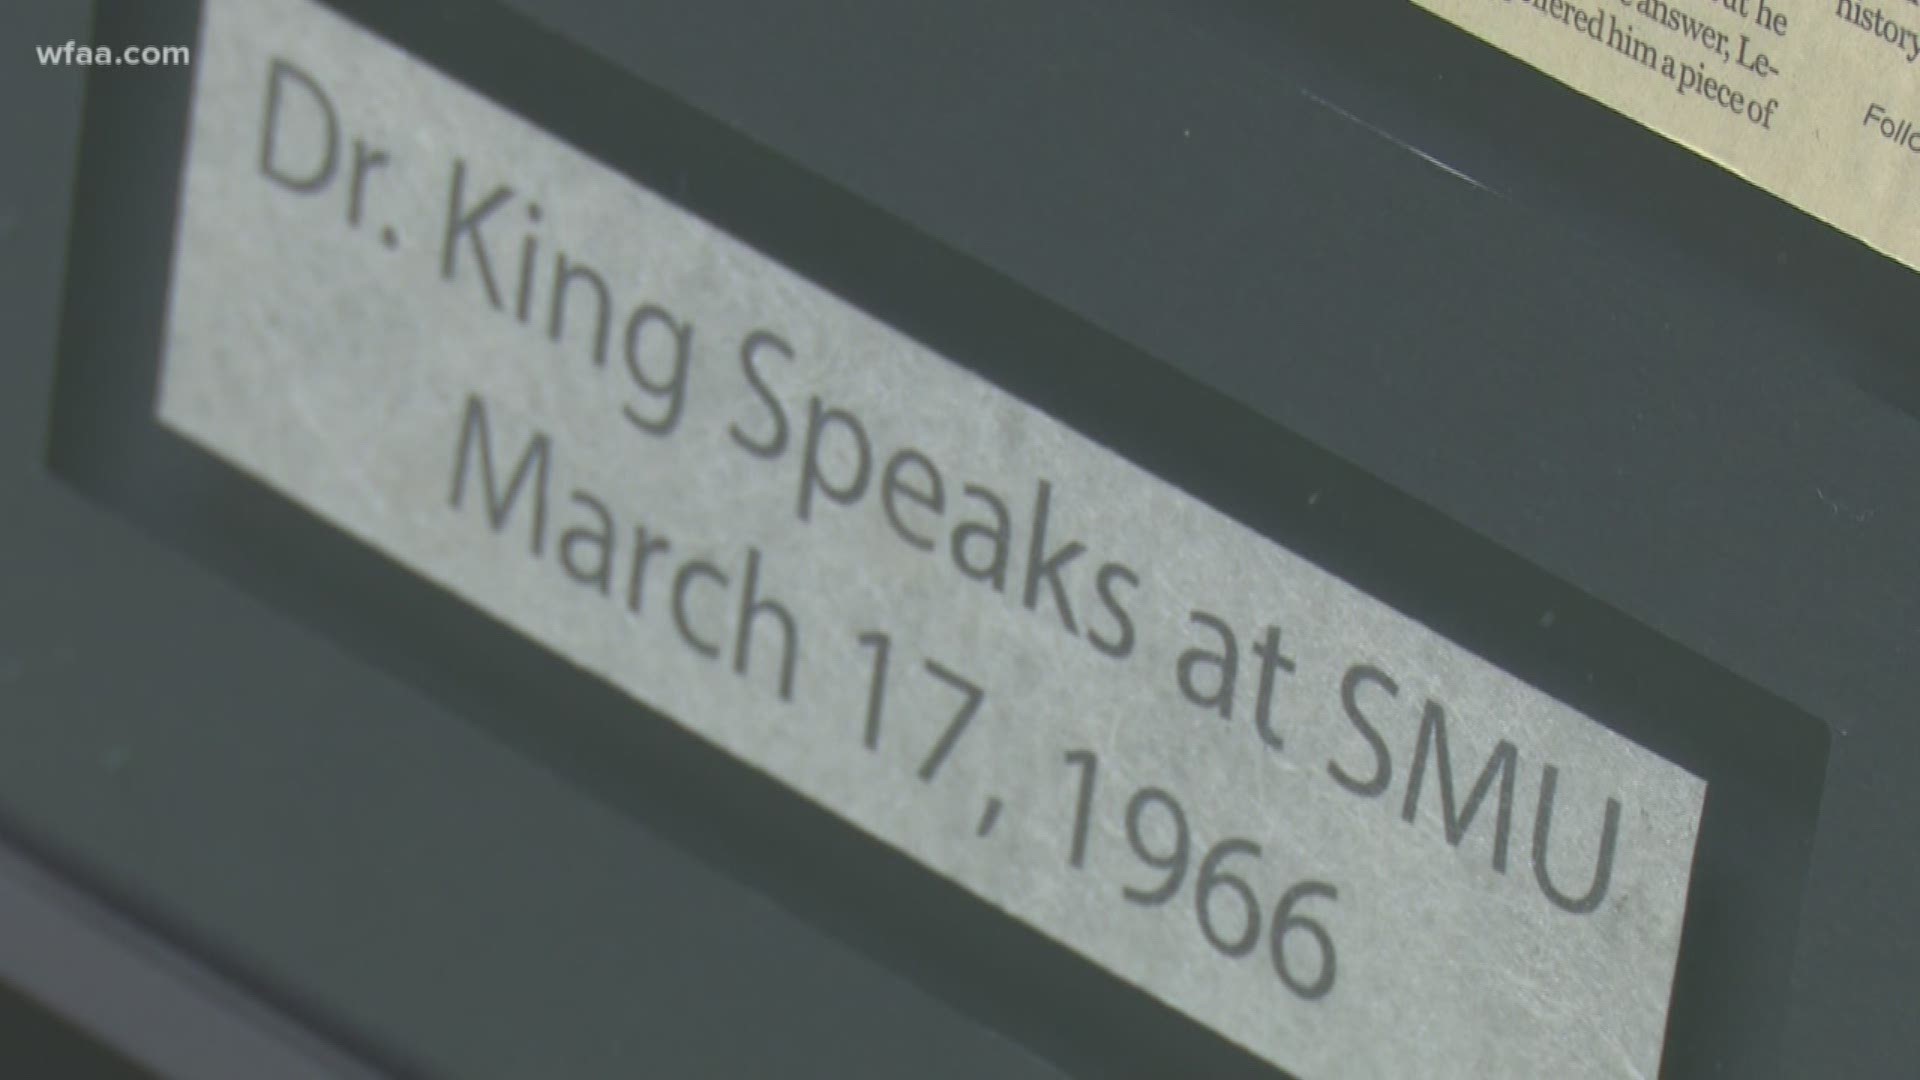 Dallas embraced MLK's legacy as time passed